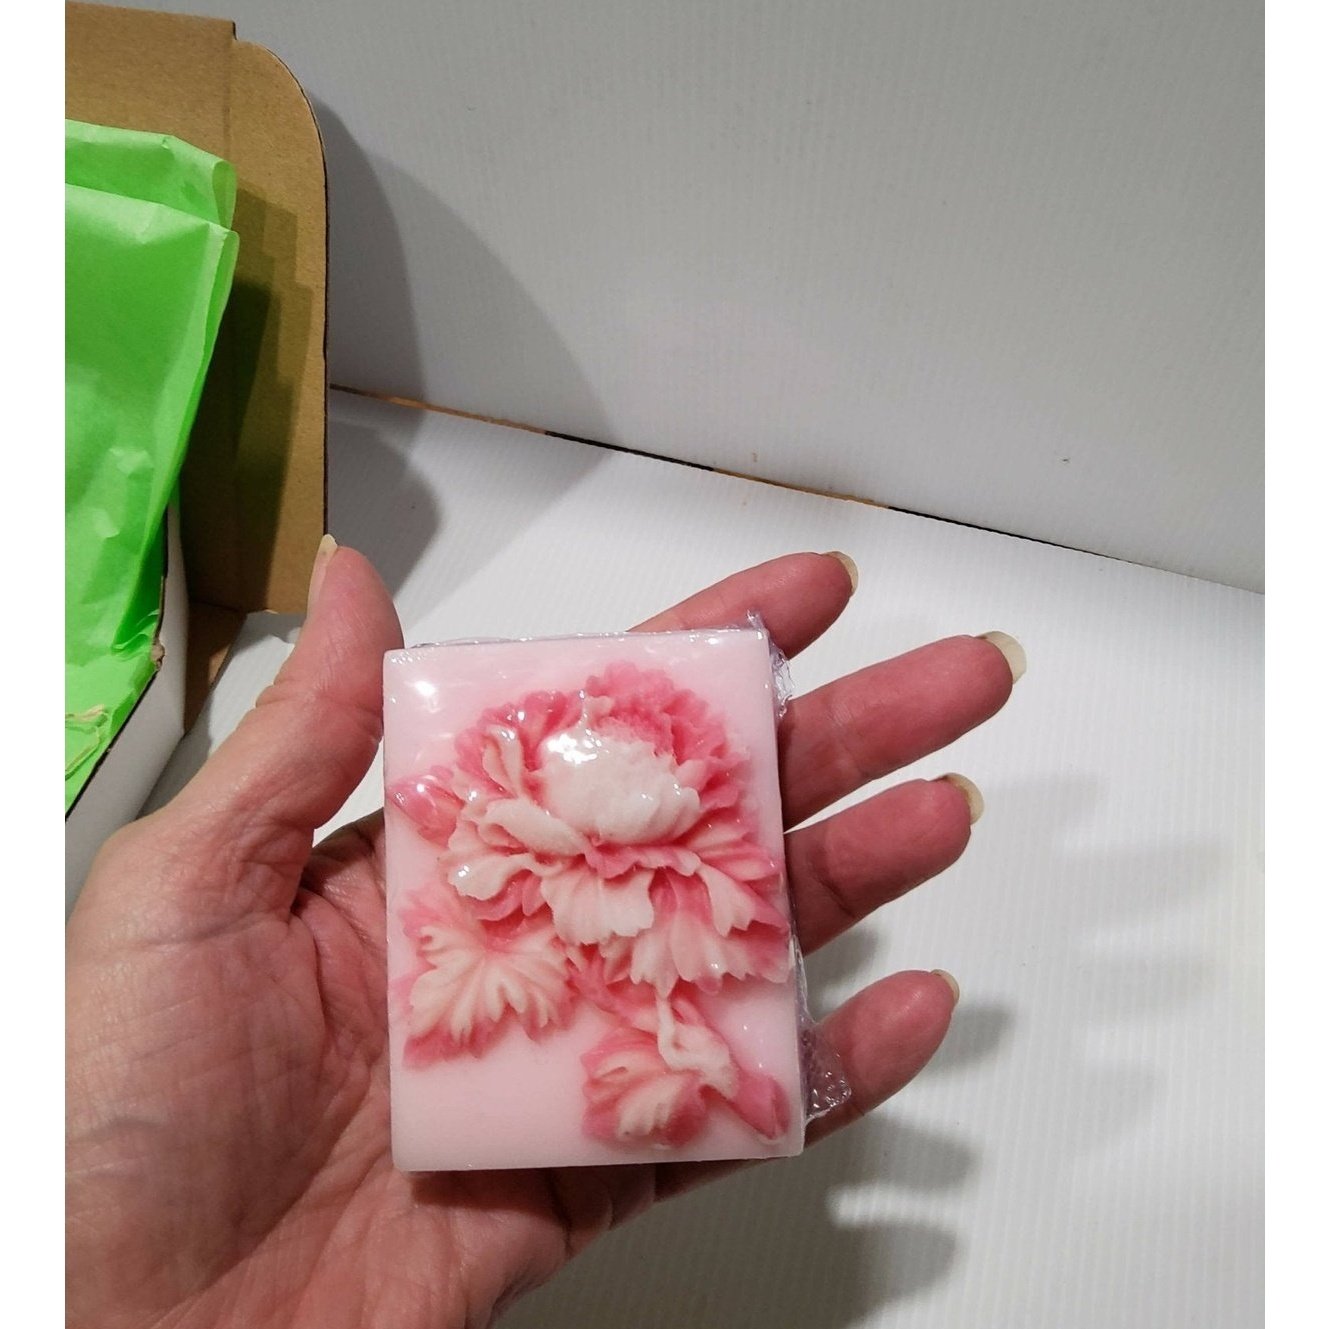 Handmade Soap - Square - Flowers x 3 Soaps - Giftbox - No Palm Oil - Vegan Friendly - Free Shipping - AMD Touring